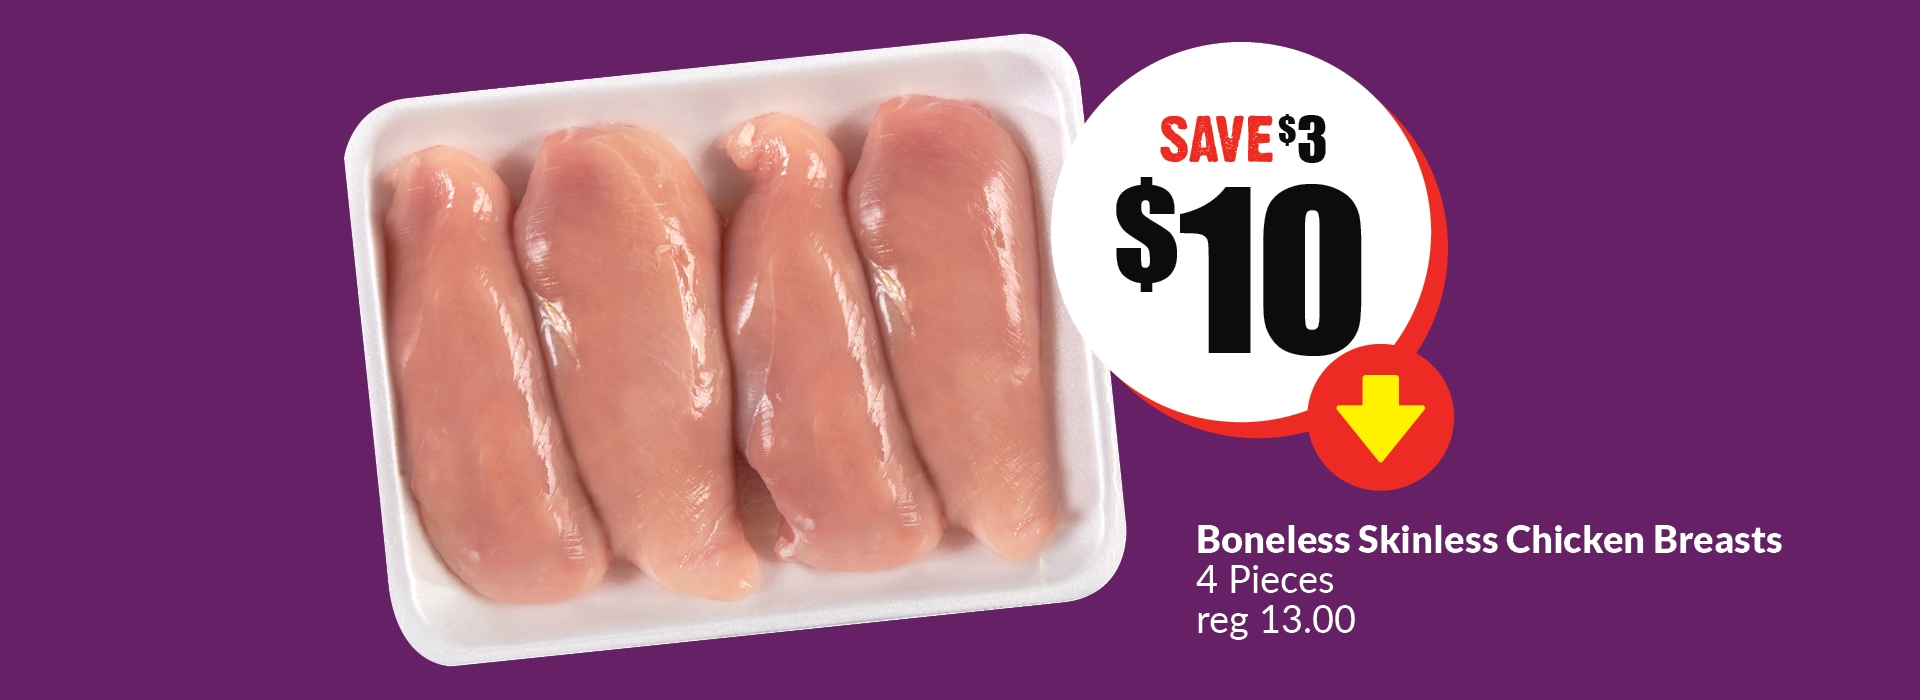 The following image contains the text, " Boneless Skinless Chicken Breasts 4 Pieces reg 13.00. Get them at just $10 and Save $3.